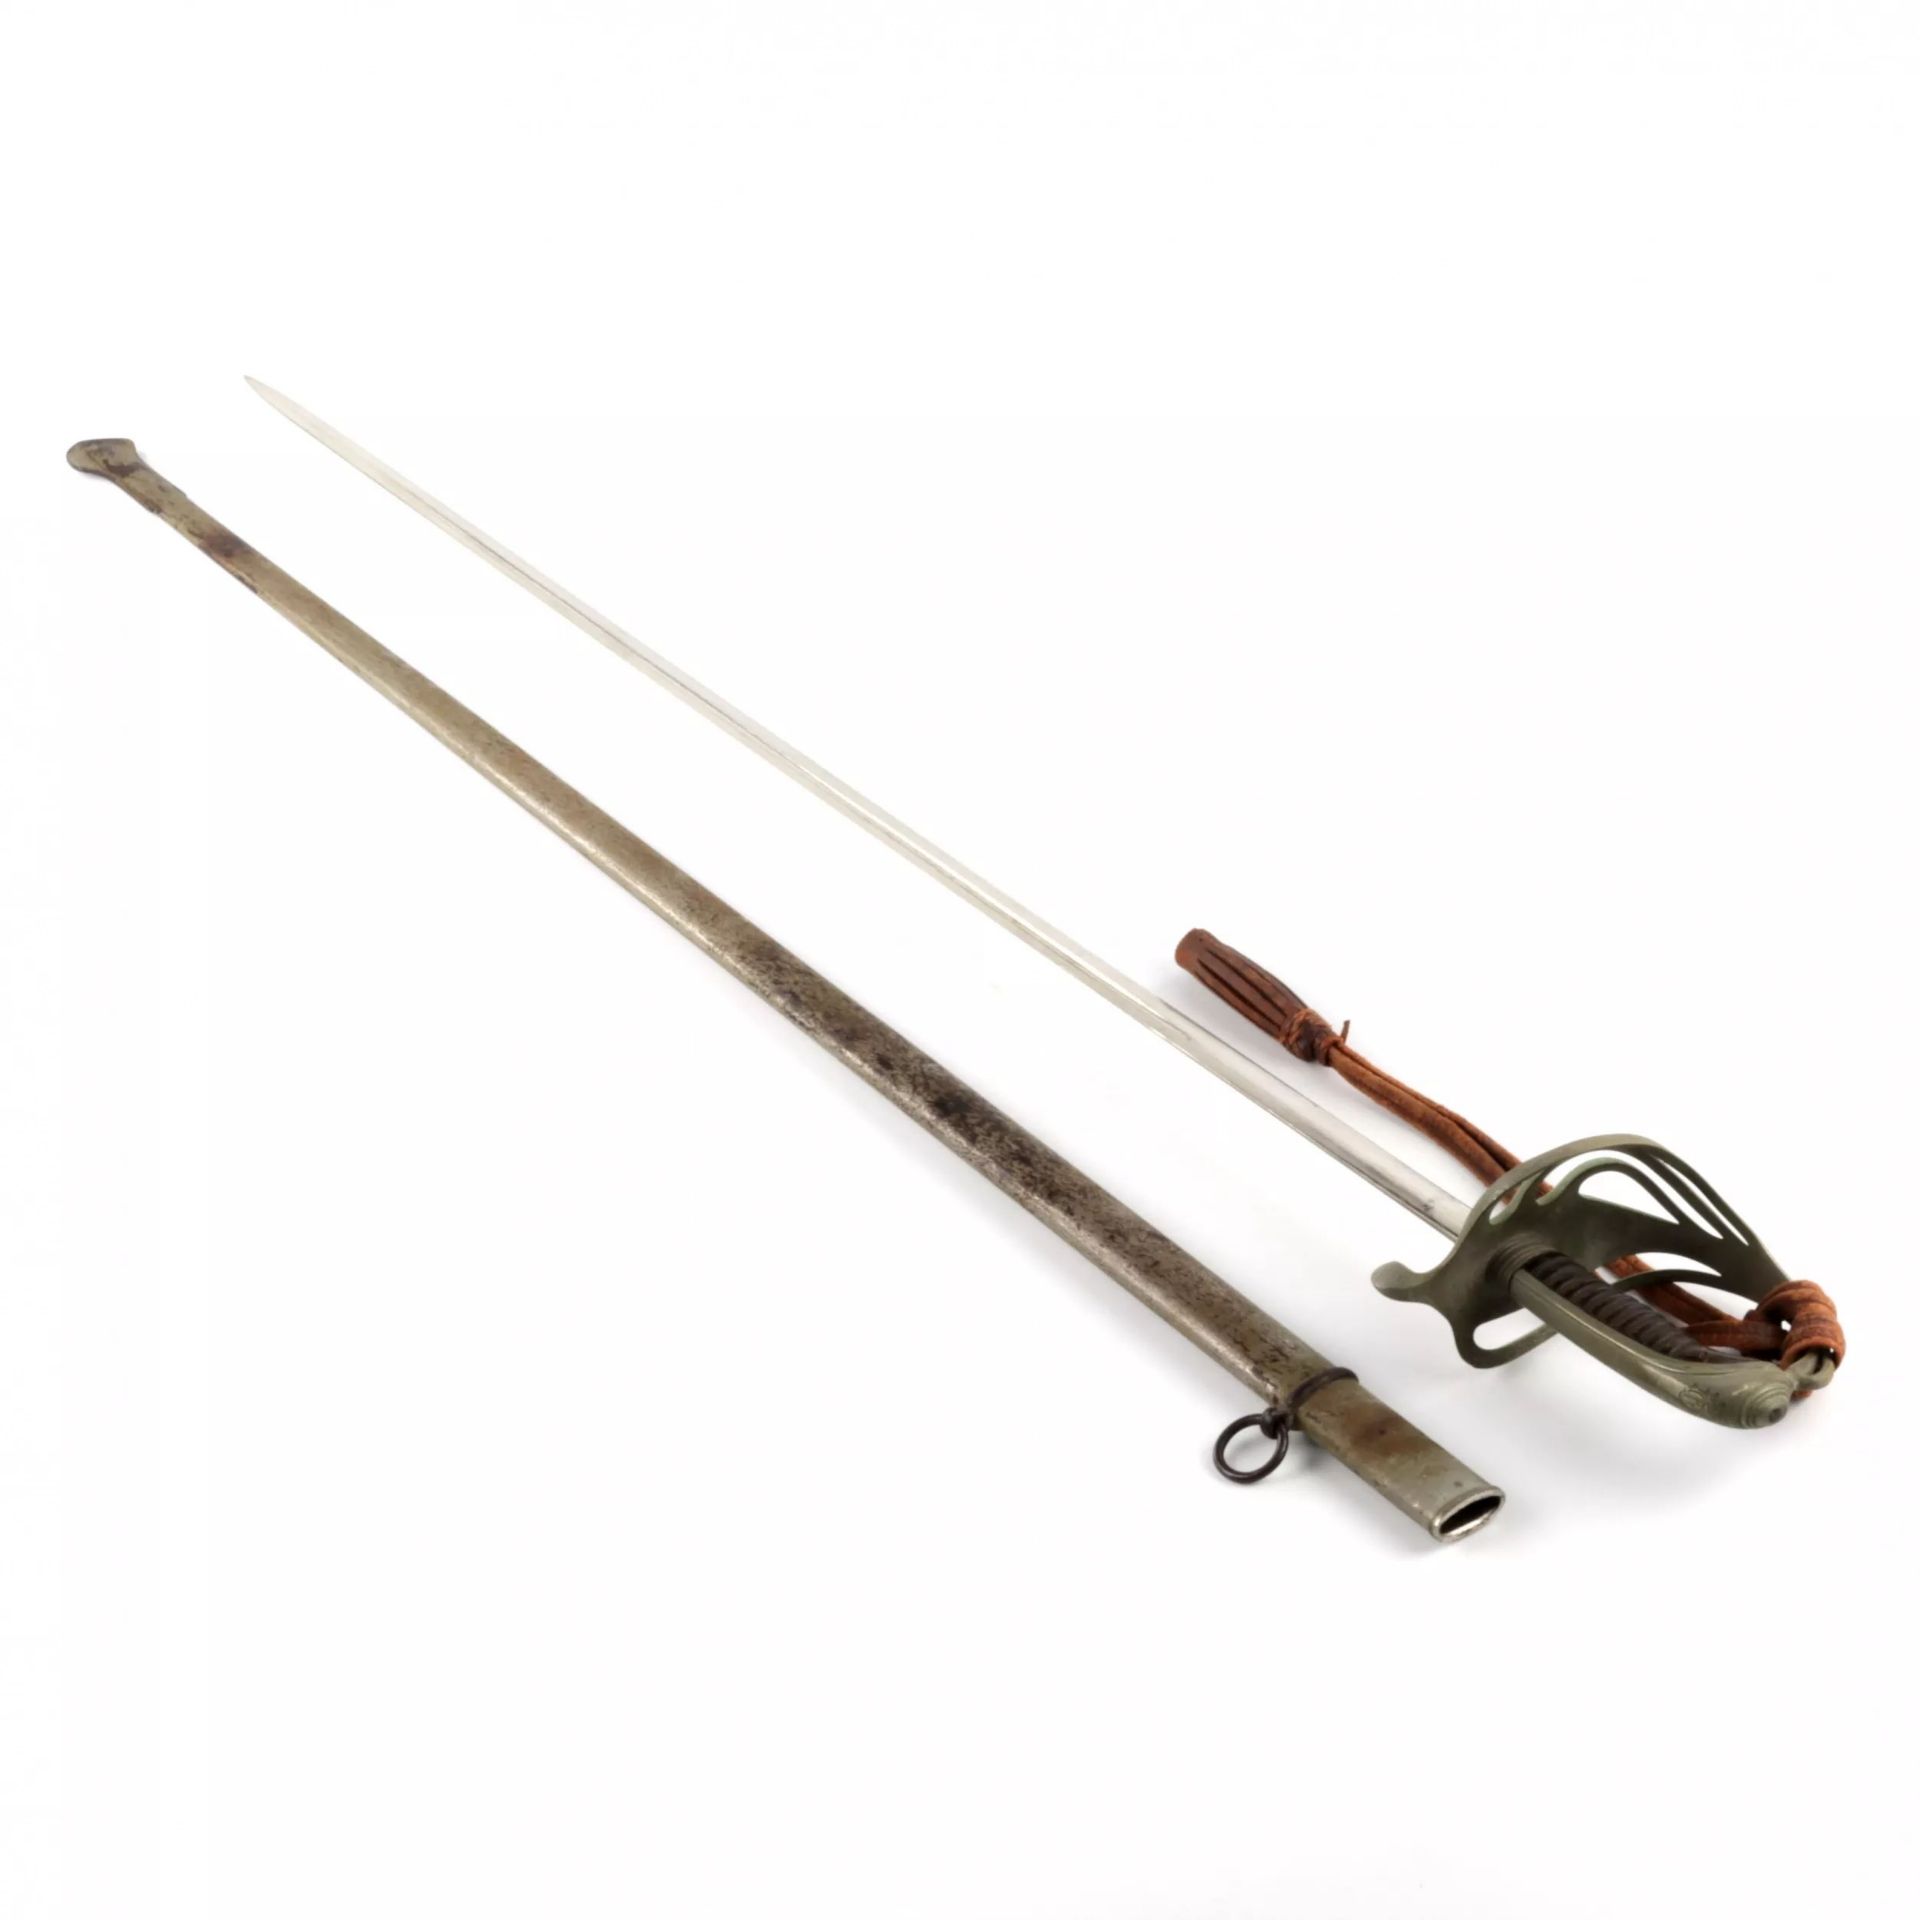 Shaped sword with a steel hilt and scabbard. - Image 2 of 7